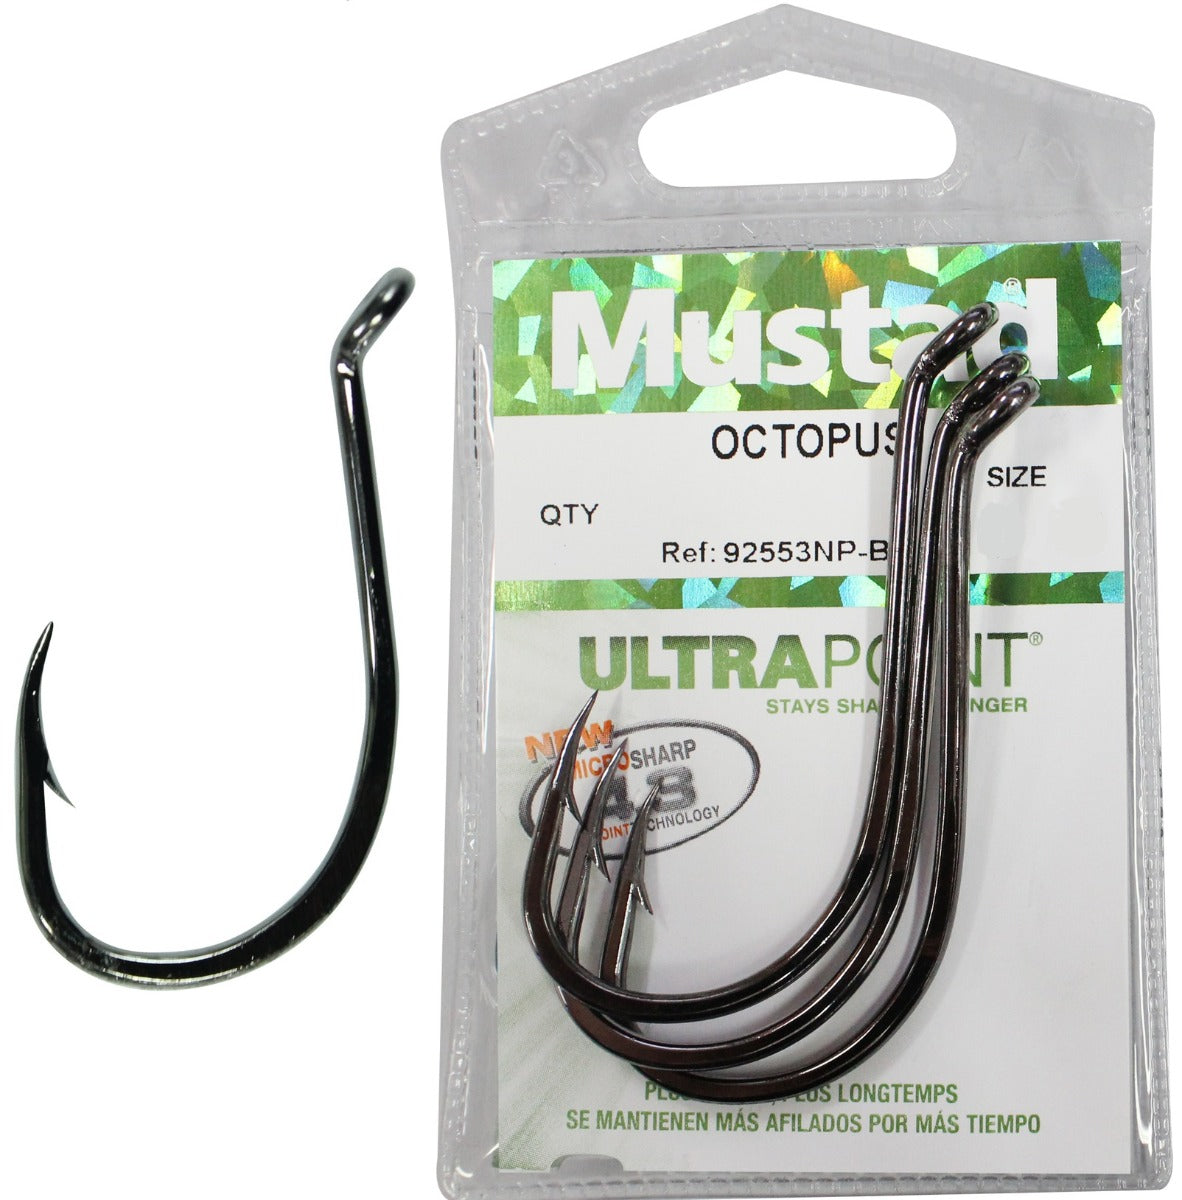 NEW Mustad Octopus Hooks Size 4 4/0 100 Count Lot Bag